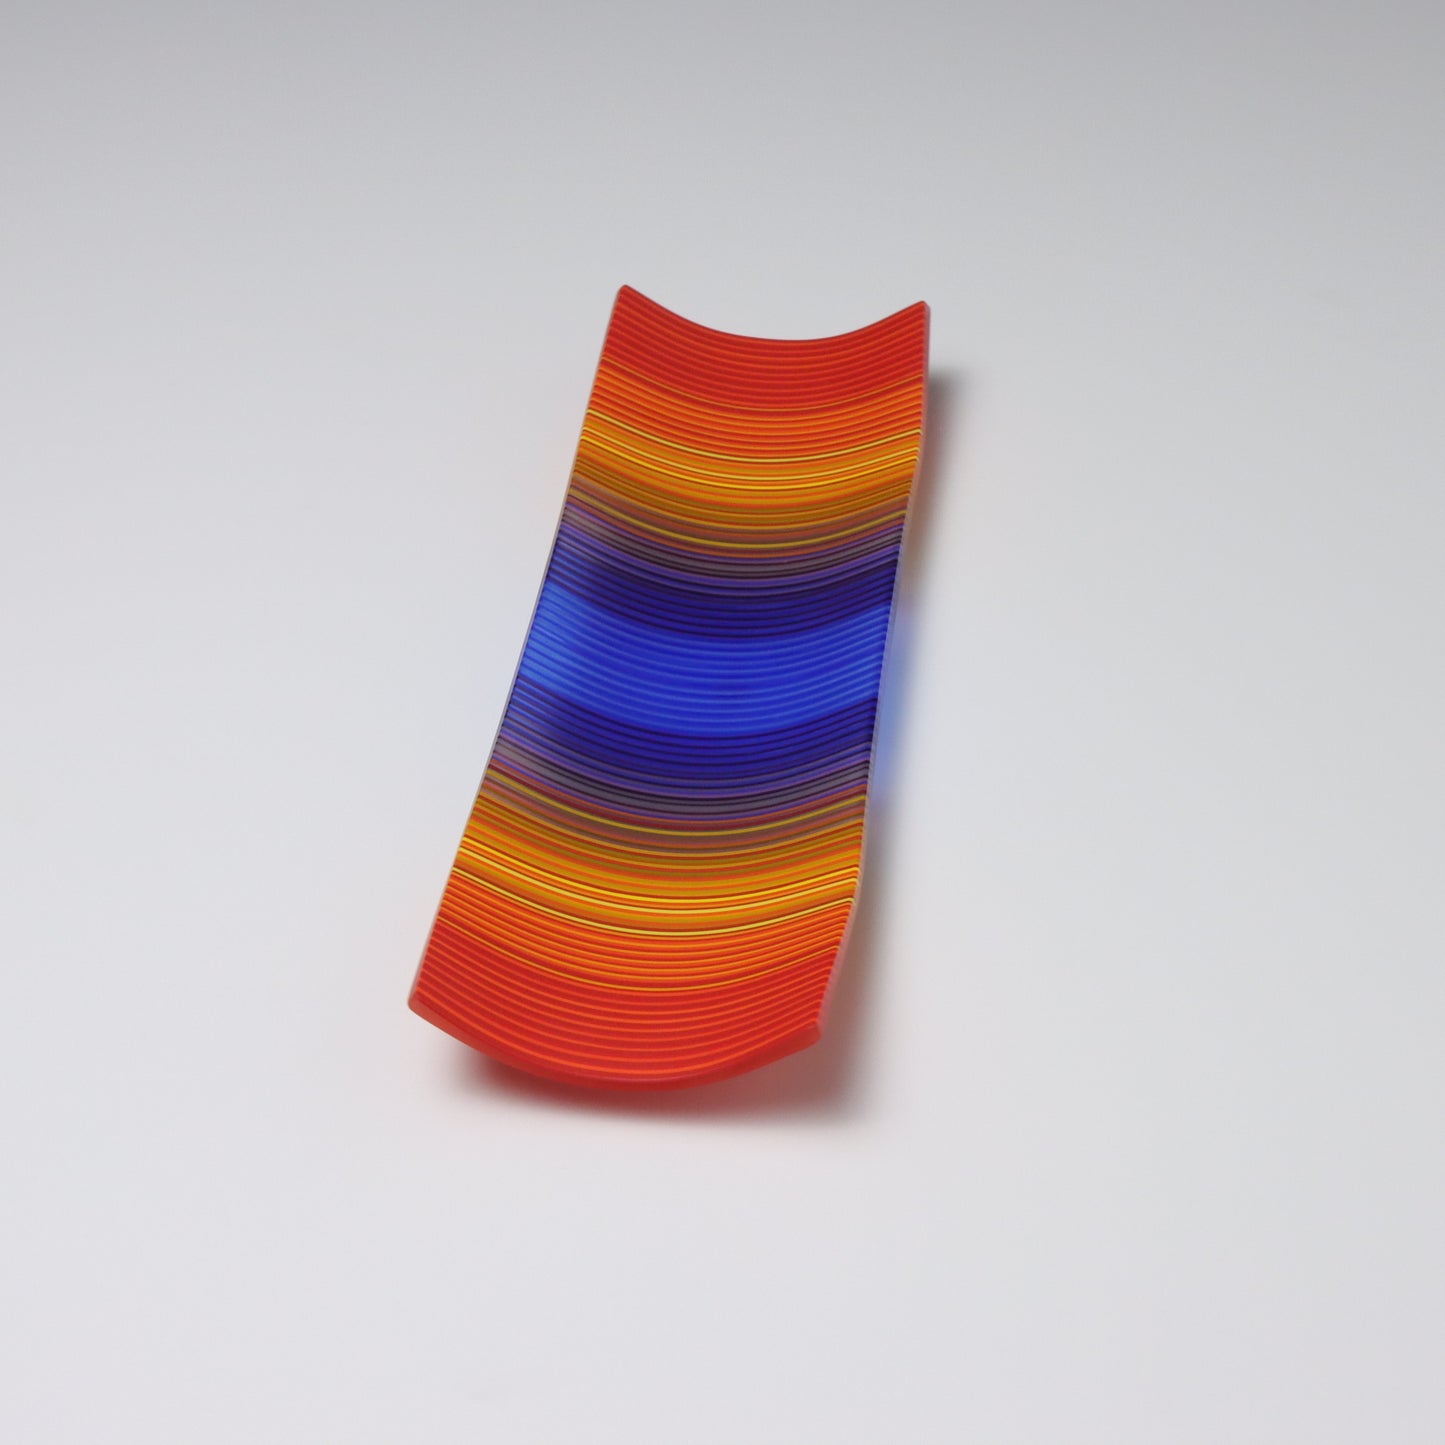 S3439 | Rectangular Shaped ColourWave Glass Plate | Red, Yellow and Blue.